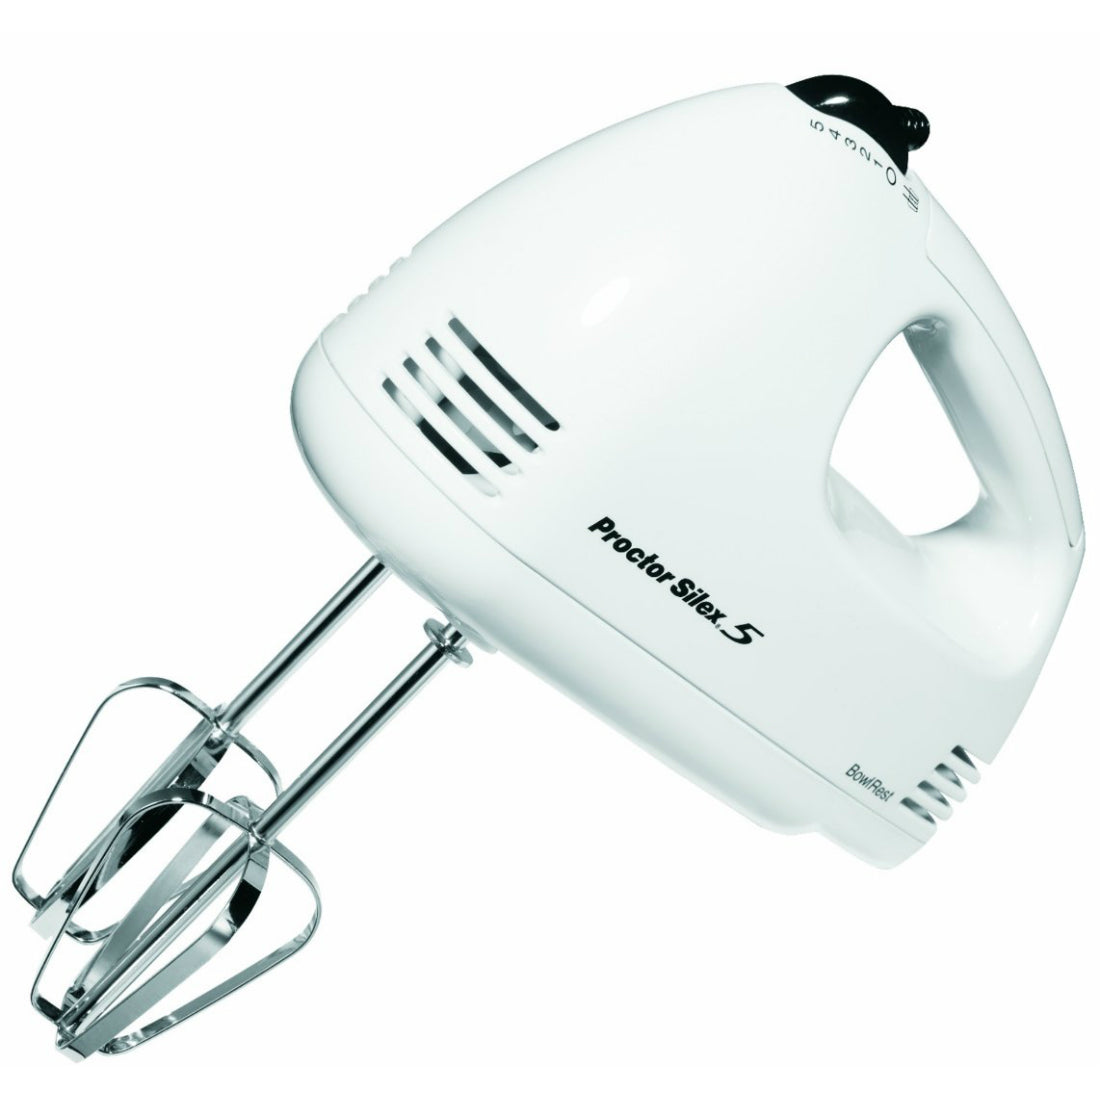 Proctor Silex 62515R Easy Mix 5-Speed Hand Mixer with Bowl Rest, 125 W